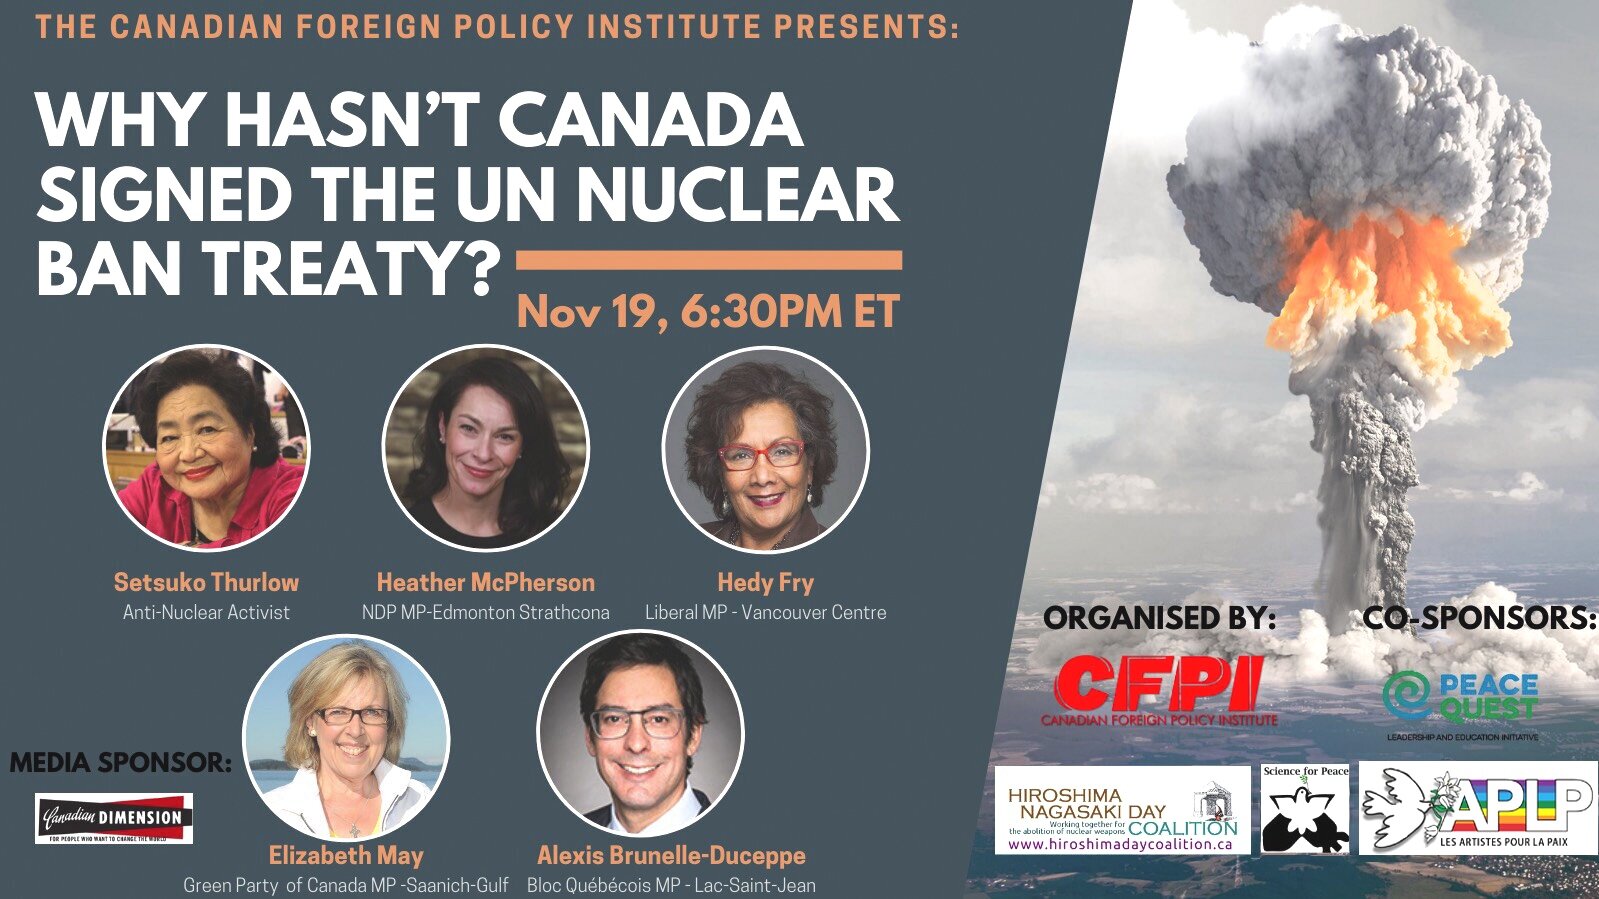 WATCH: WHY HASN'T CANADA SIGNED THE UN NUCLEAR BAN TREATY?